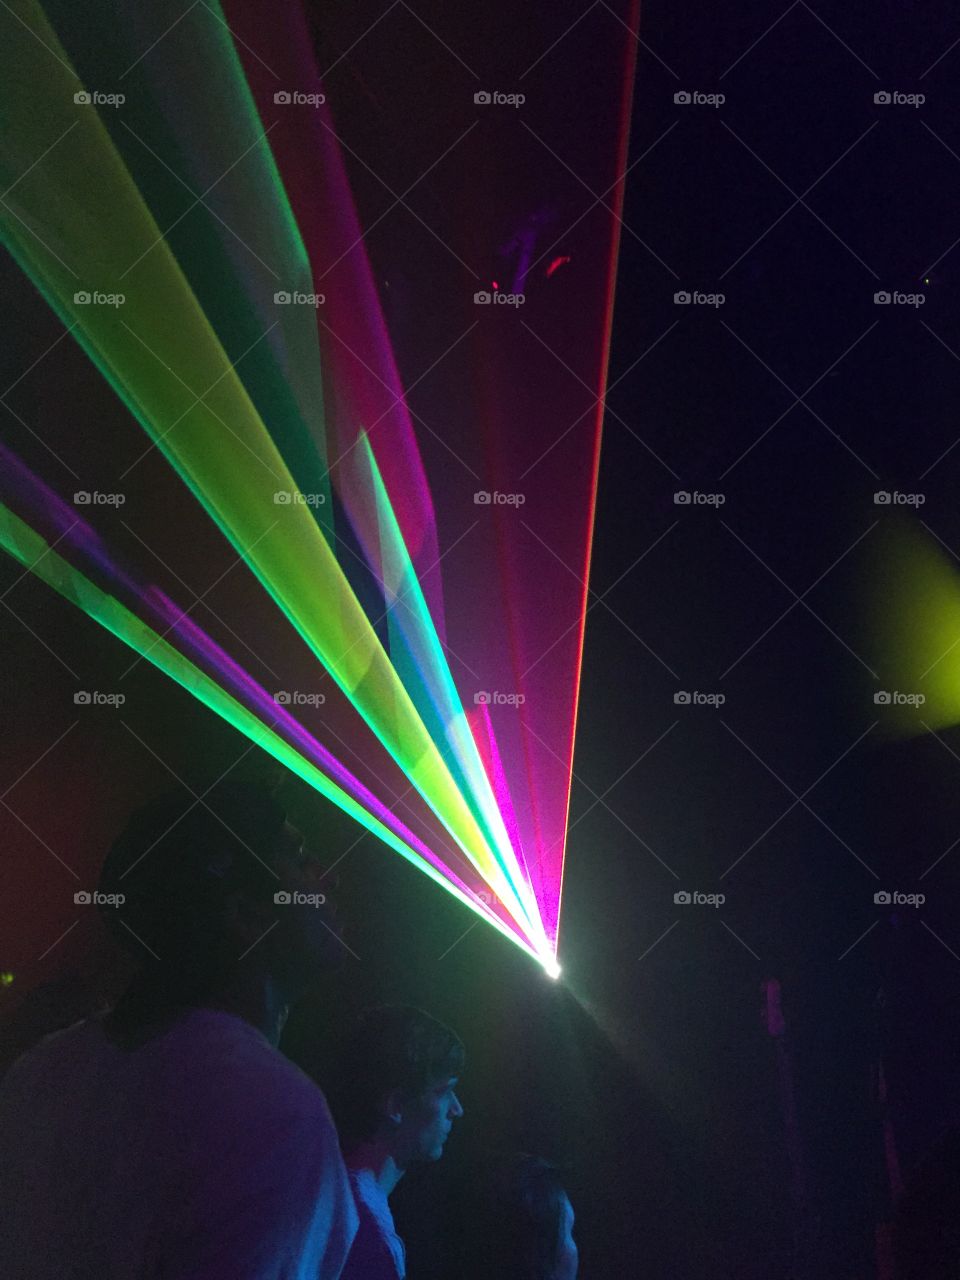 Abstract lasers